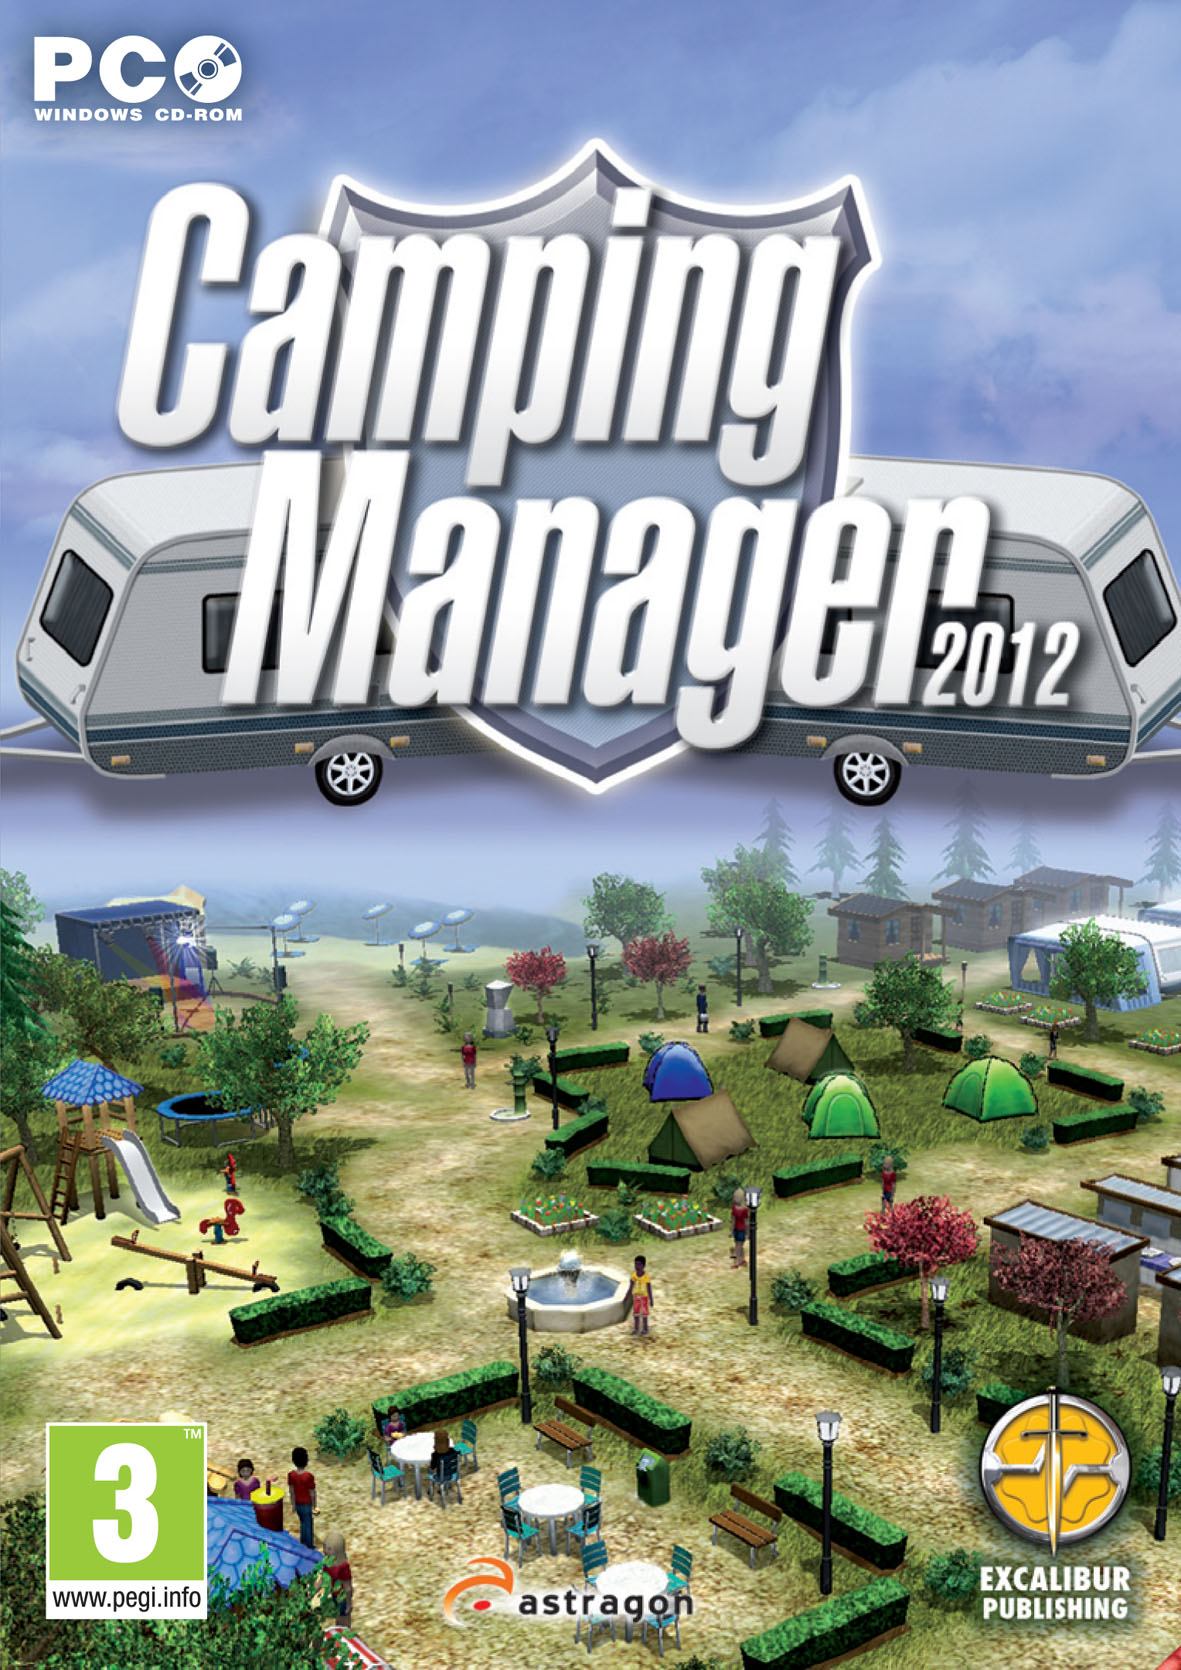 Camping Manager 2012 - predn DVD obal